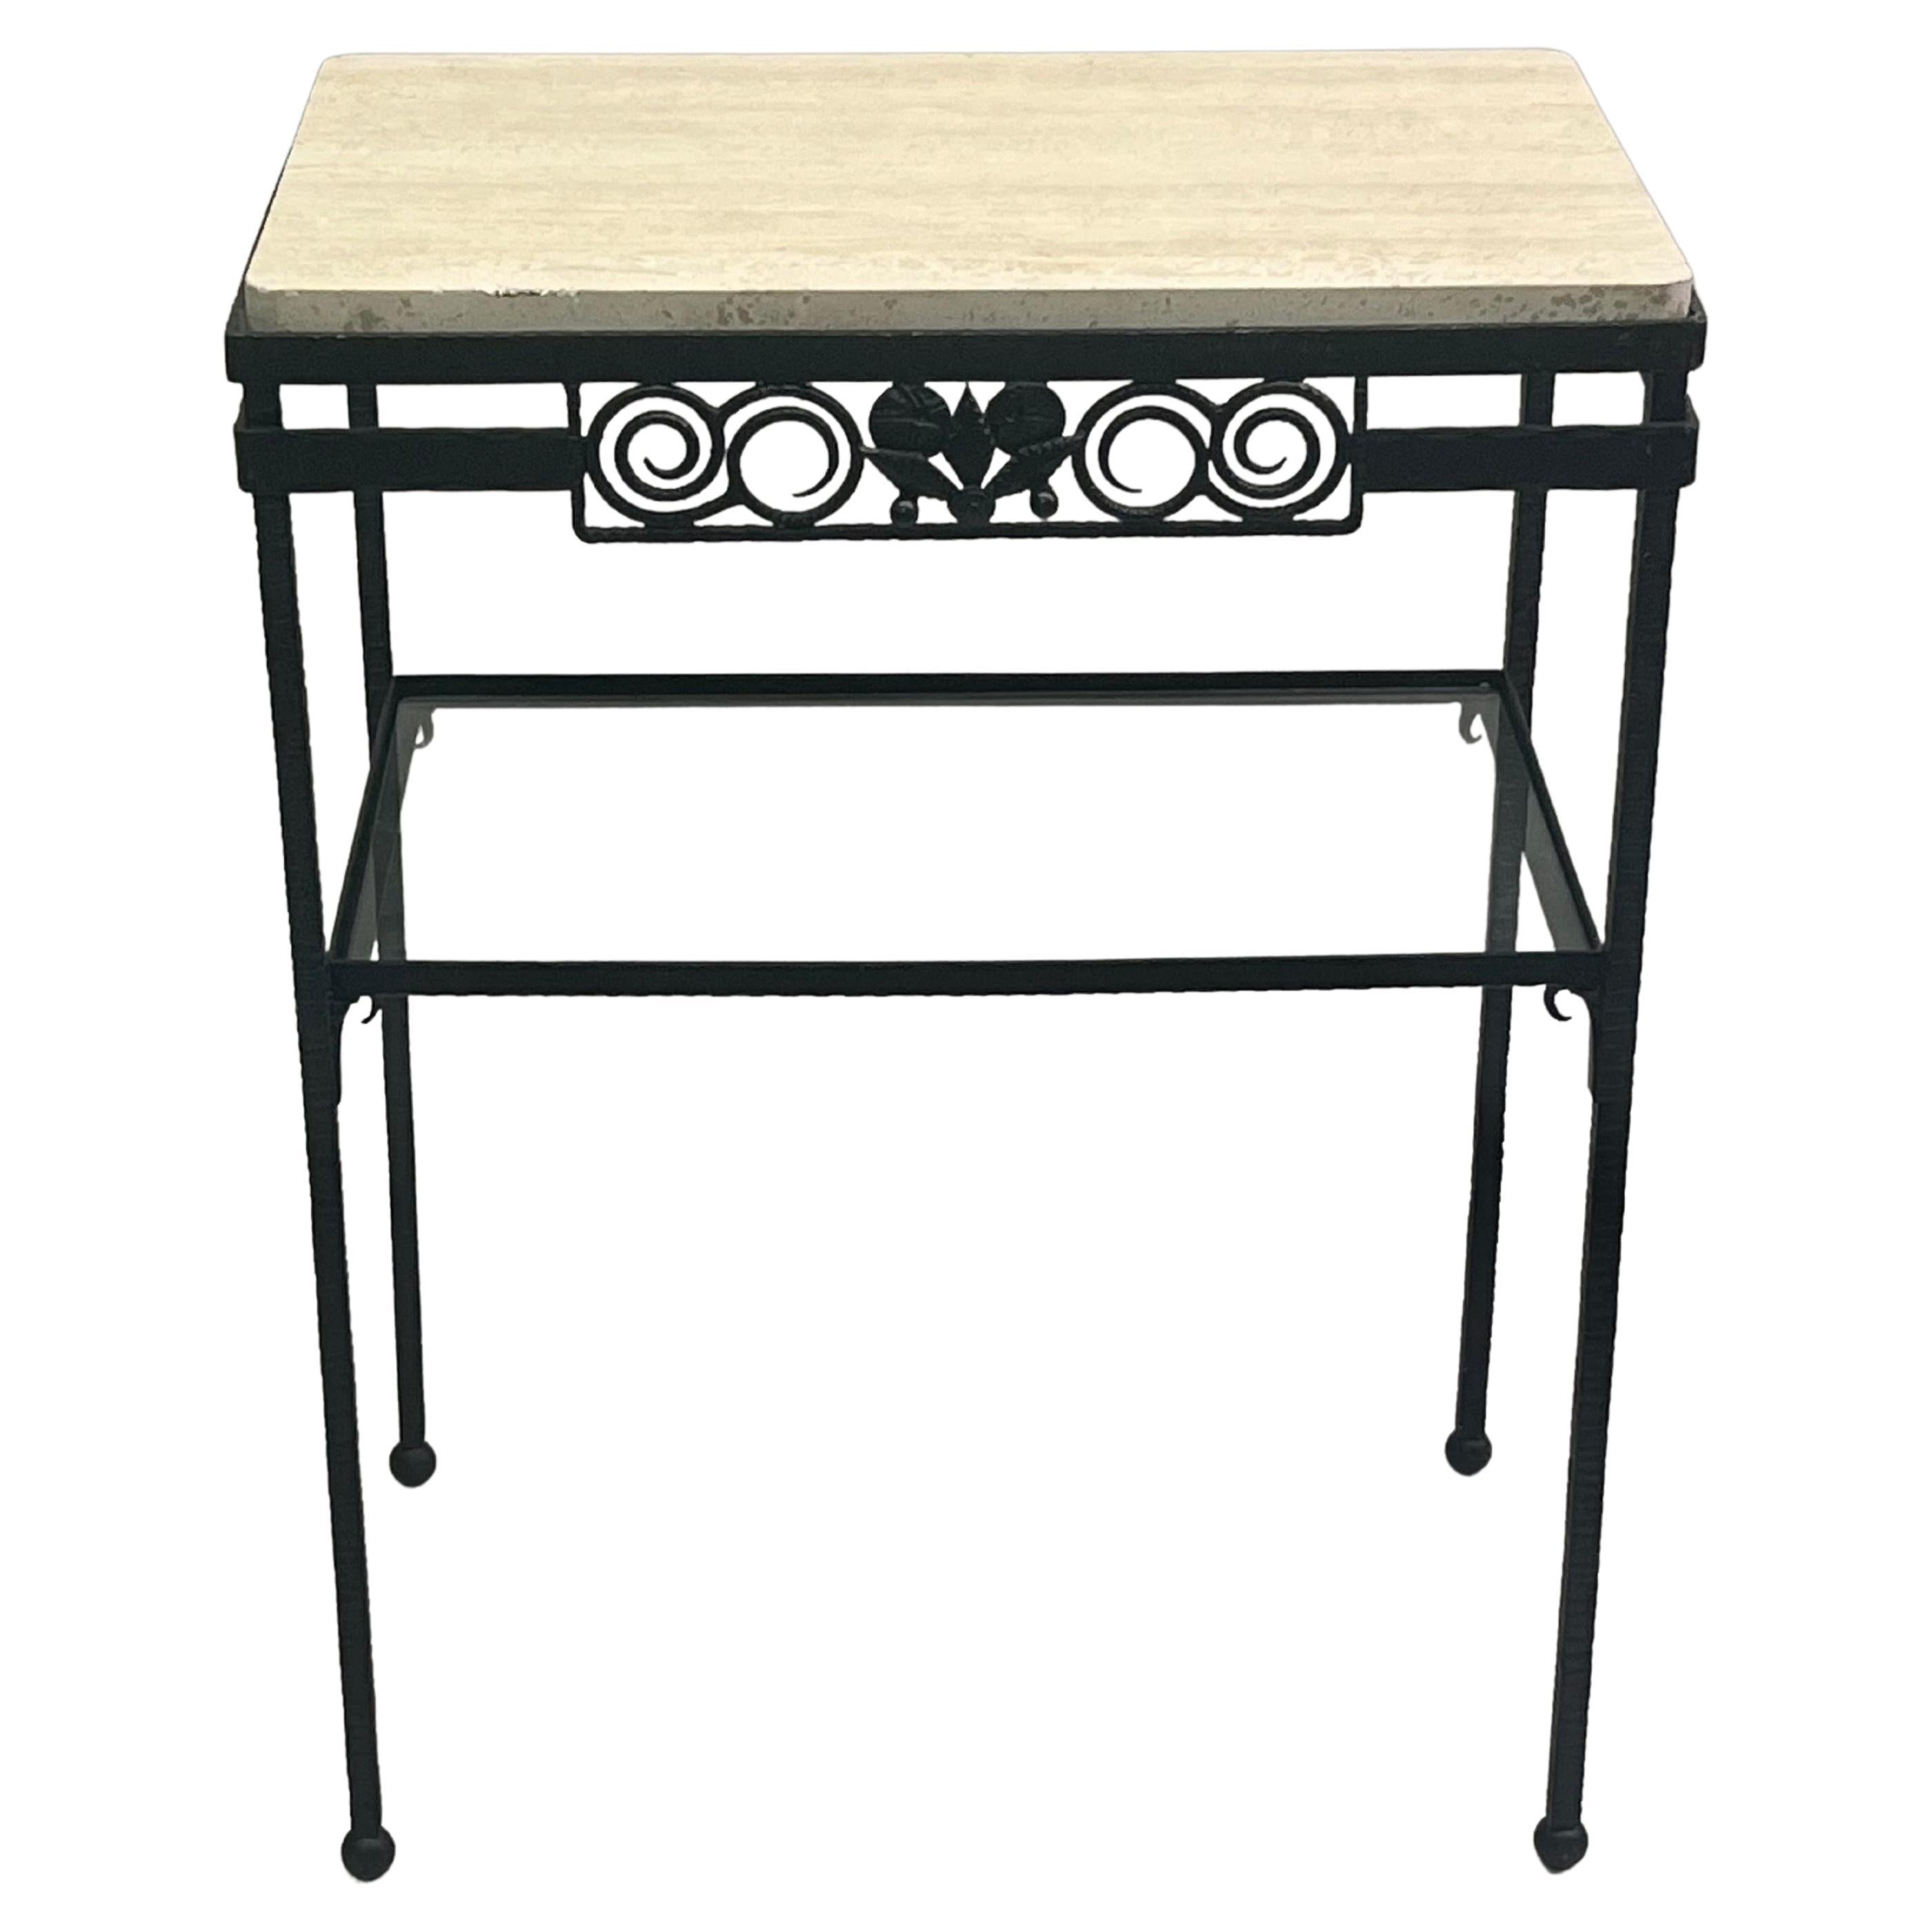 French Art Deco Wrought Iron and Travertine Console Attributed to Edgar Brandt